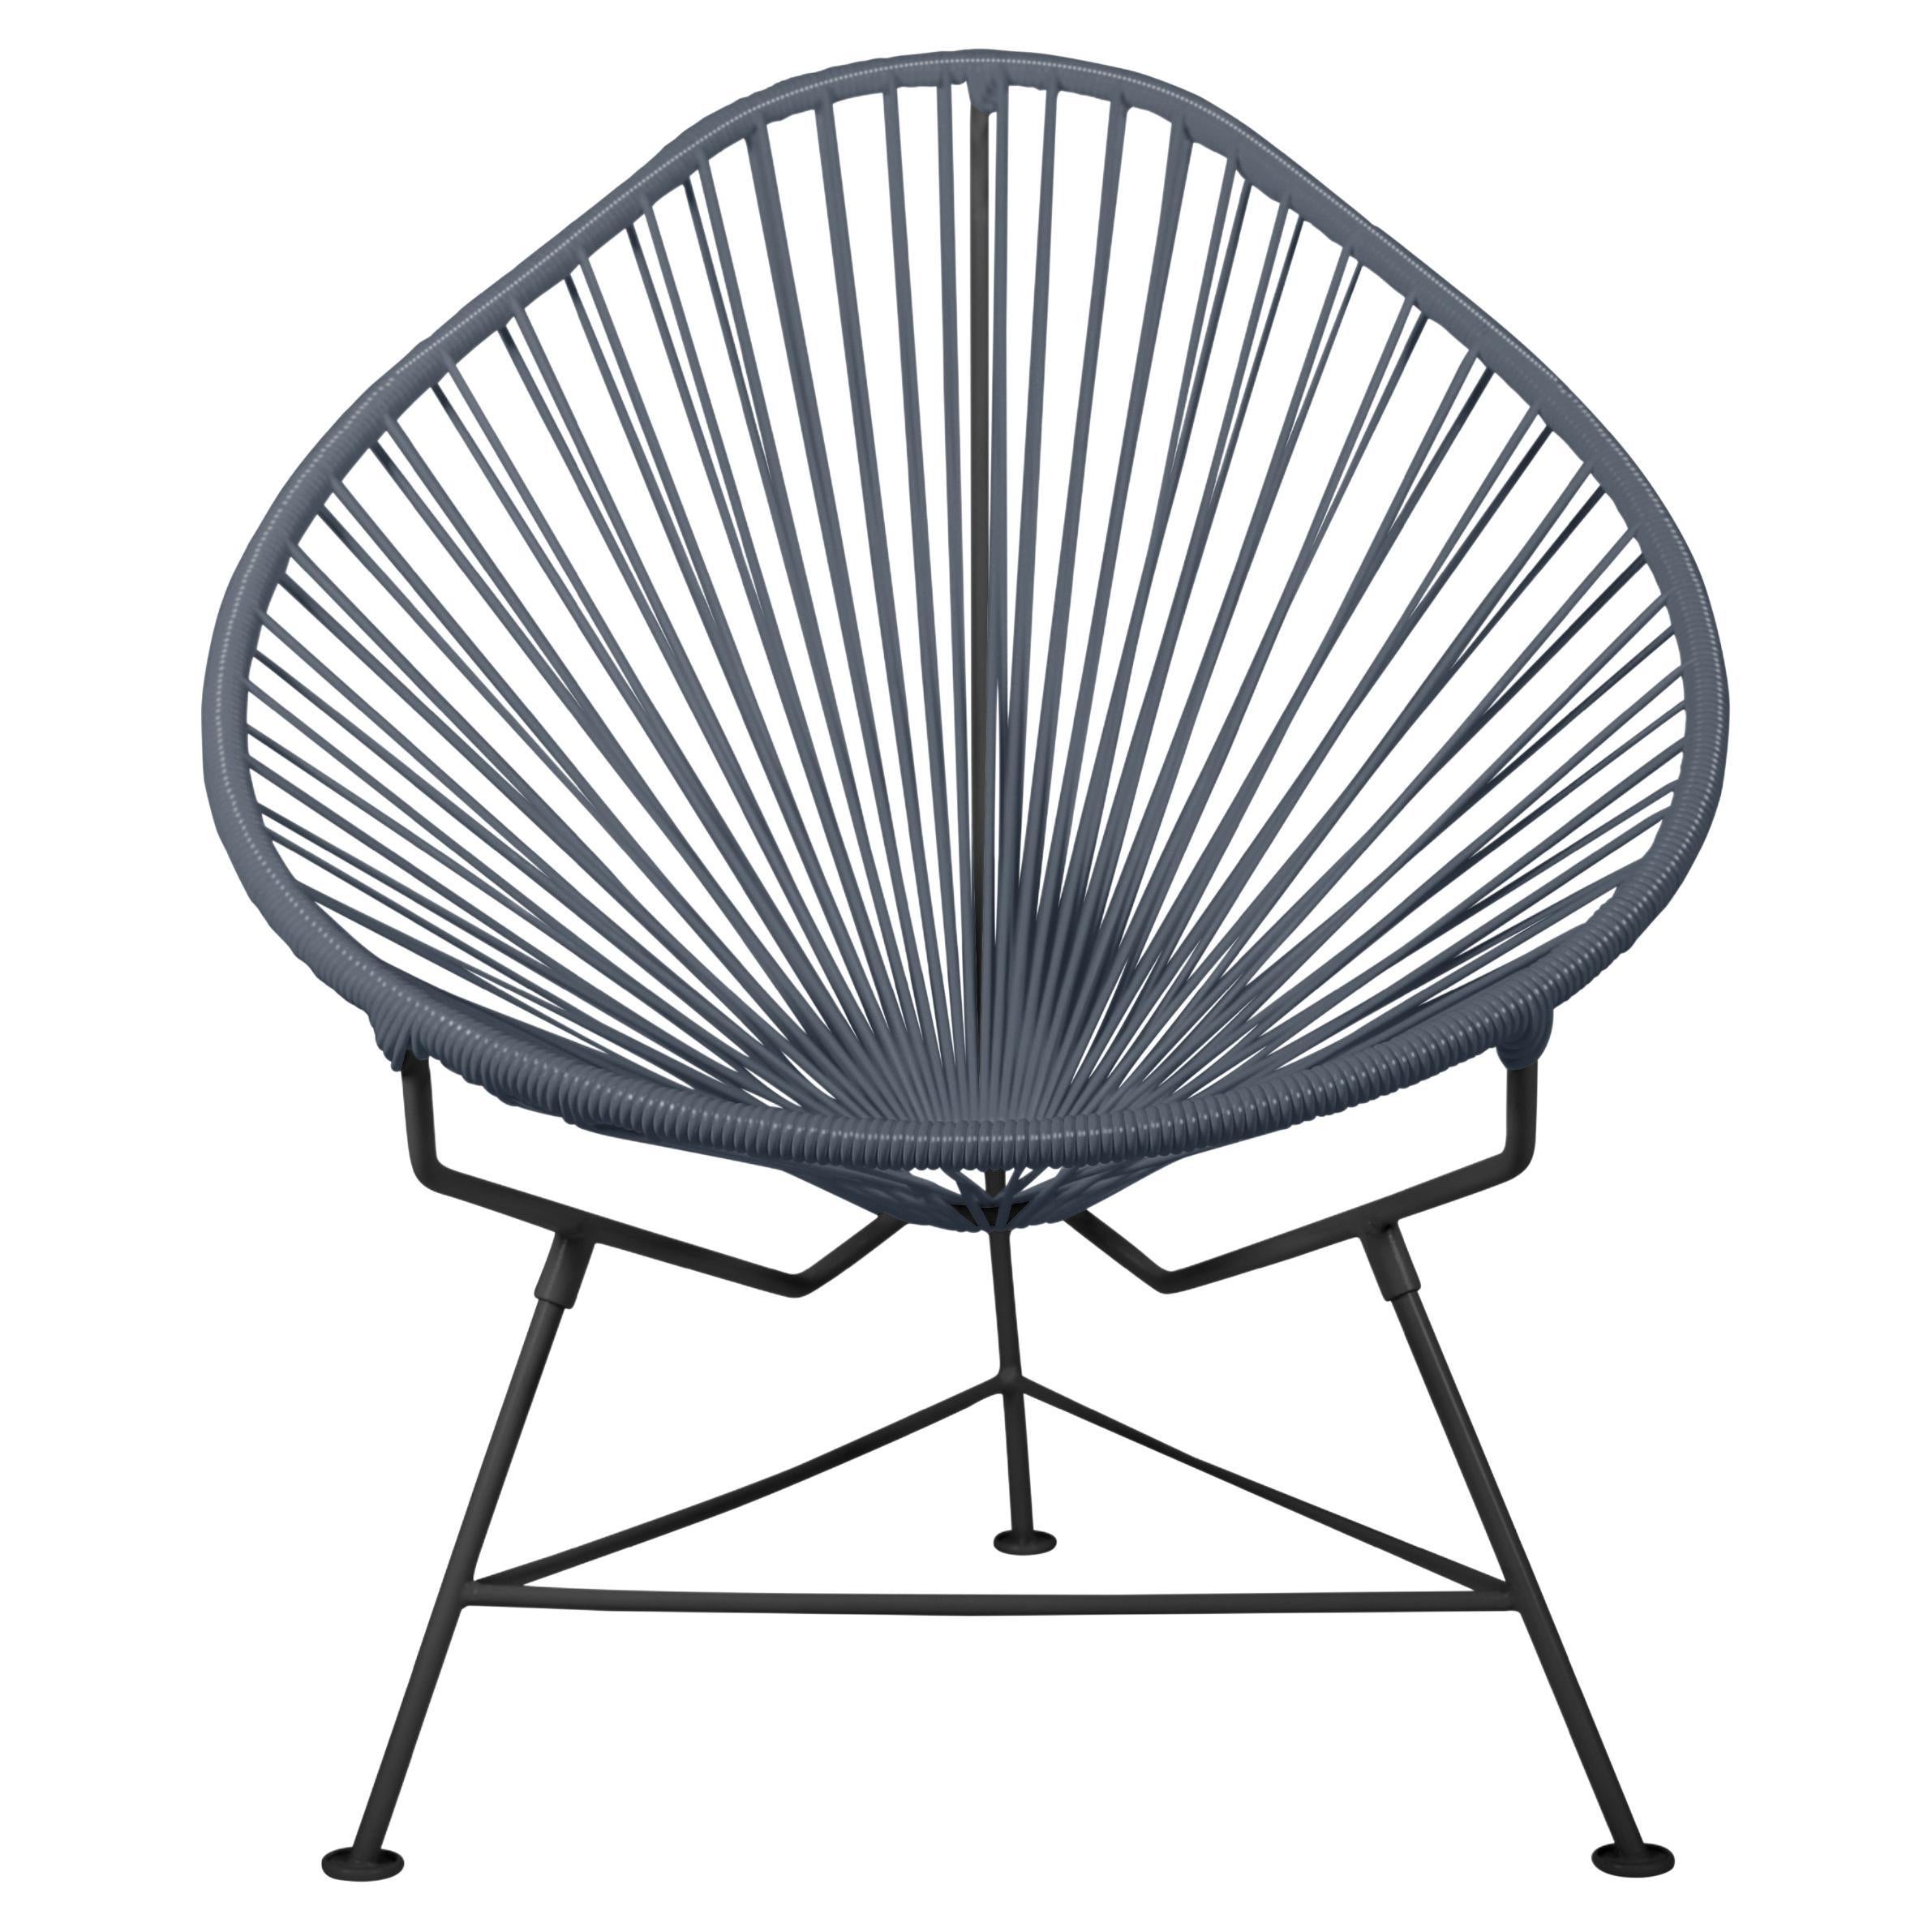 Innit Designs Acapulco Chair Grey Weave on Black Frame